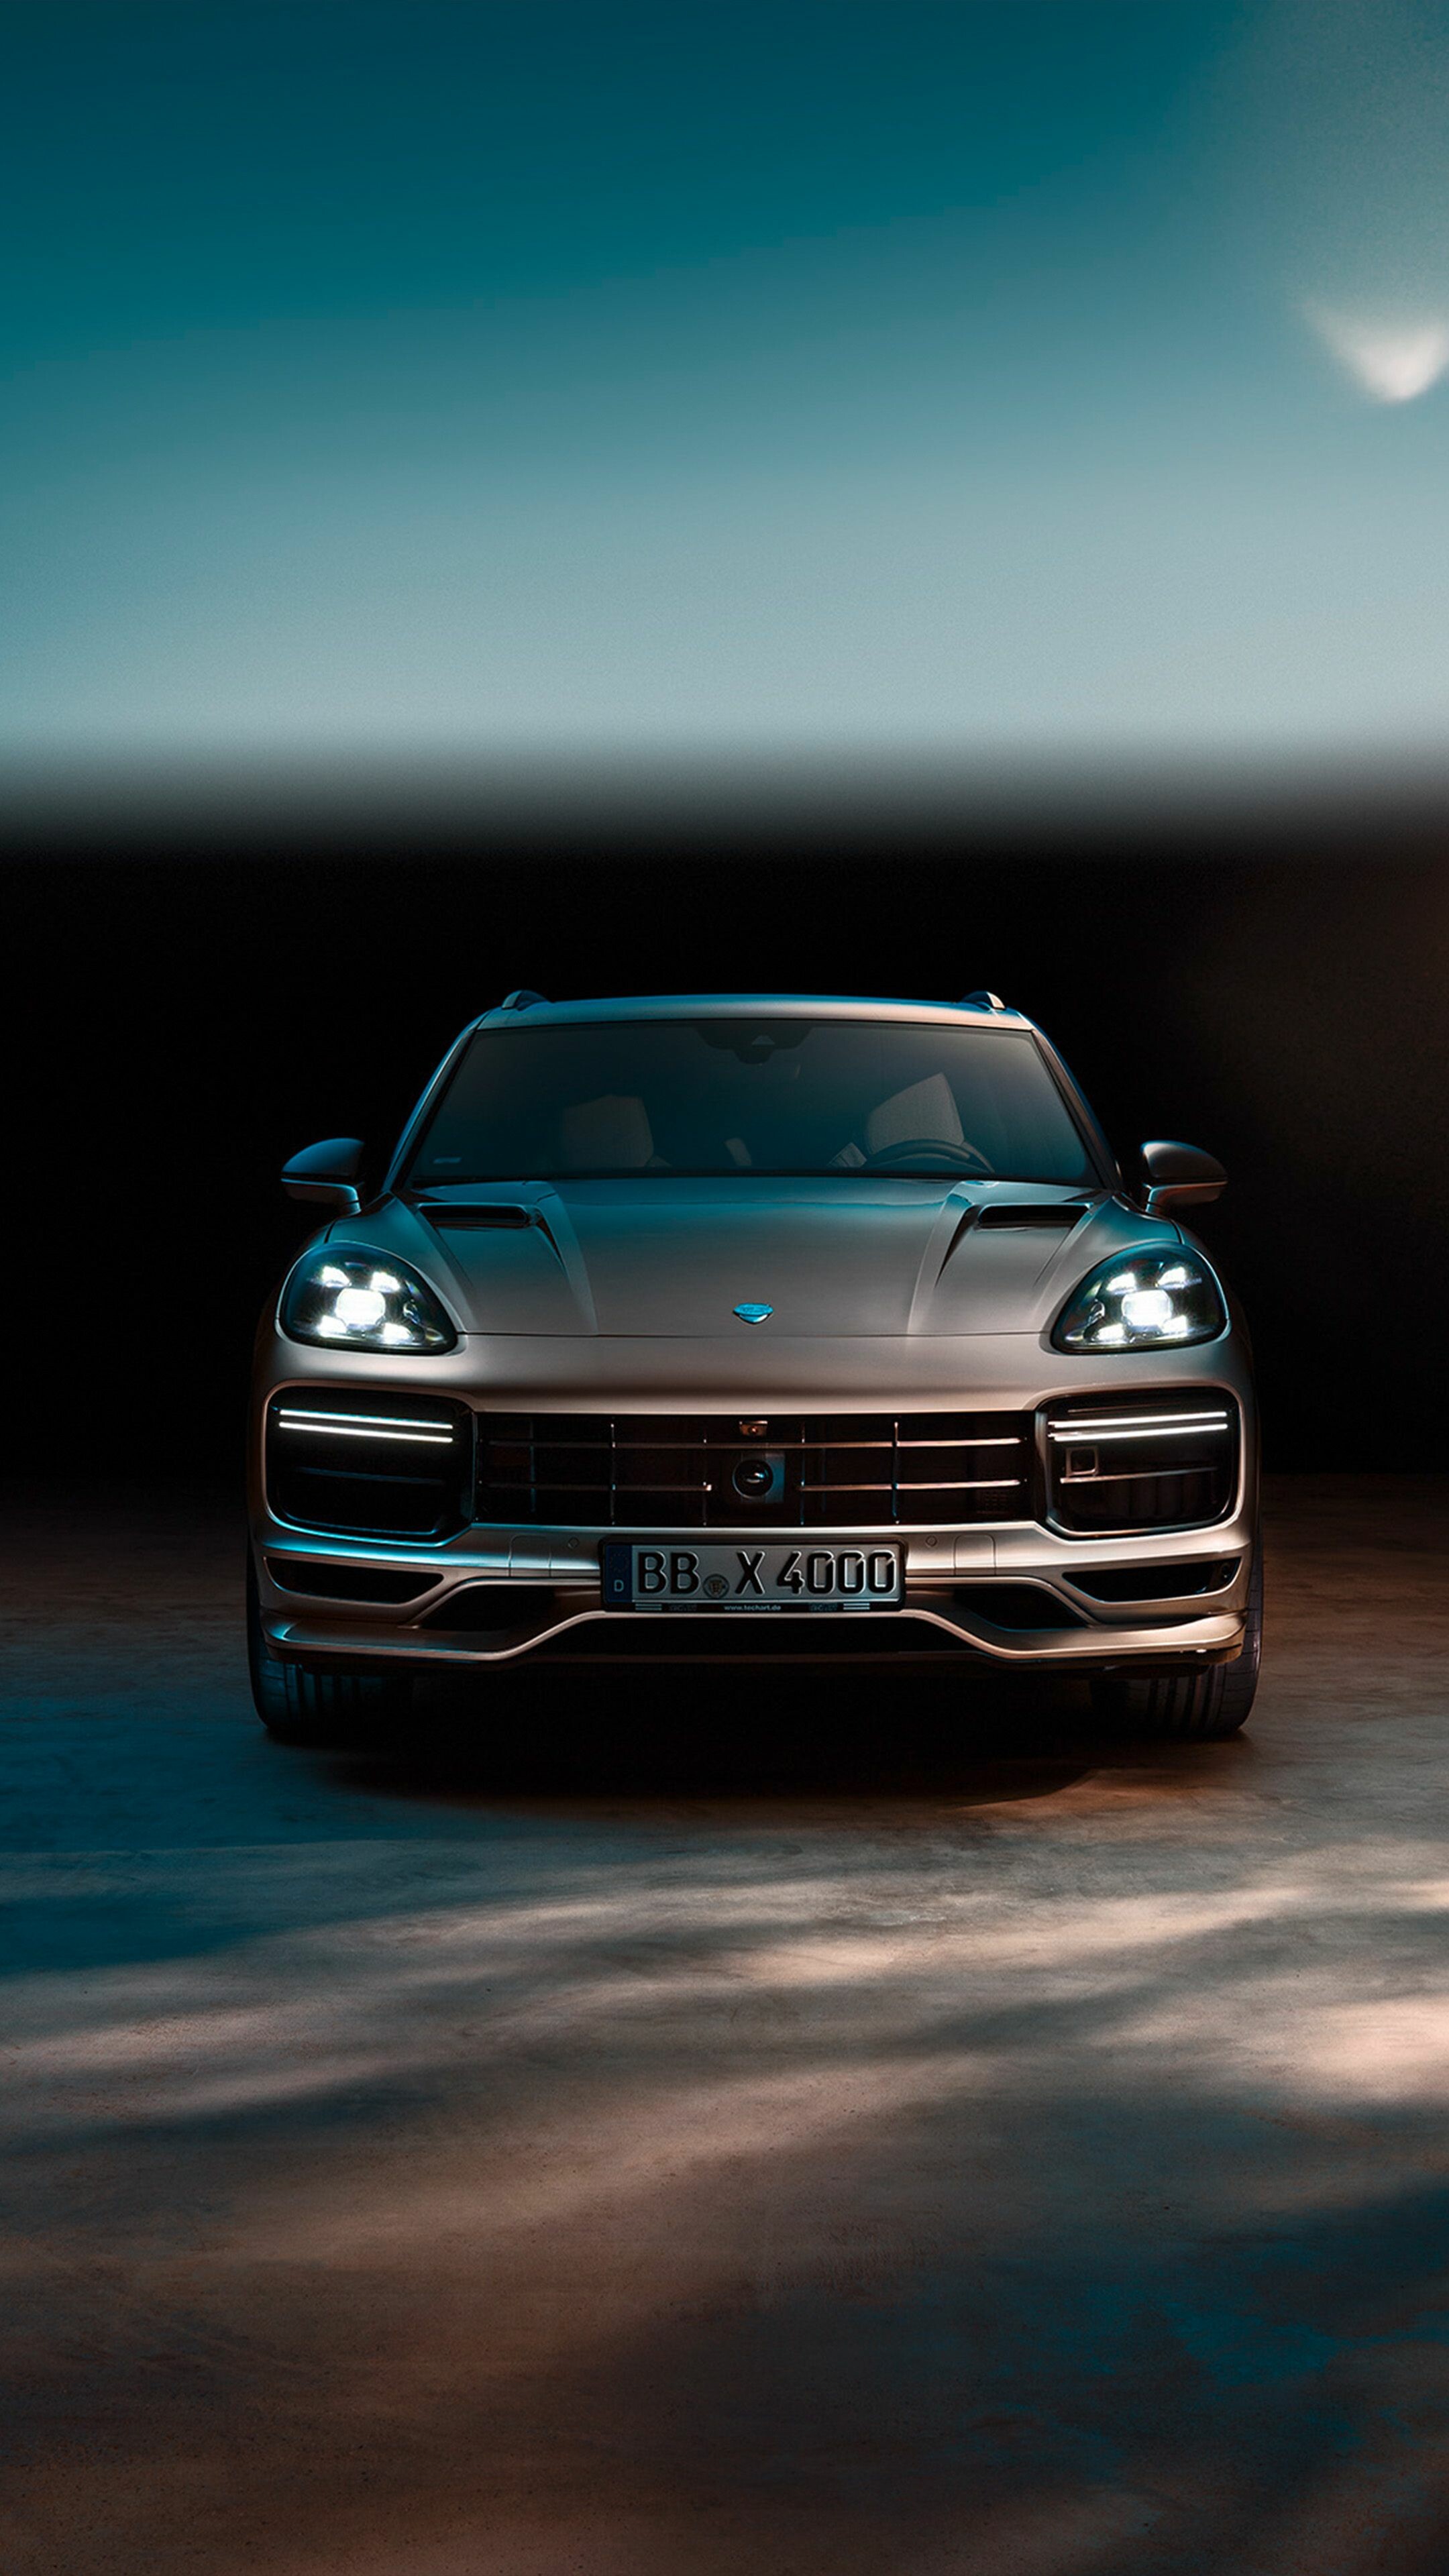 Porsche: Cayenne Turbo, A hyper-expensive SUV rocket with mega-power turbocharged V-8s, surprising agility, and a large helping of luxury. 2160x3840 4K Background.